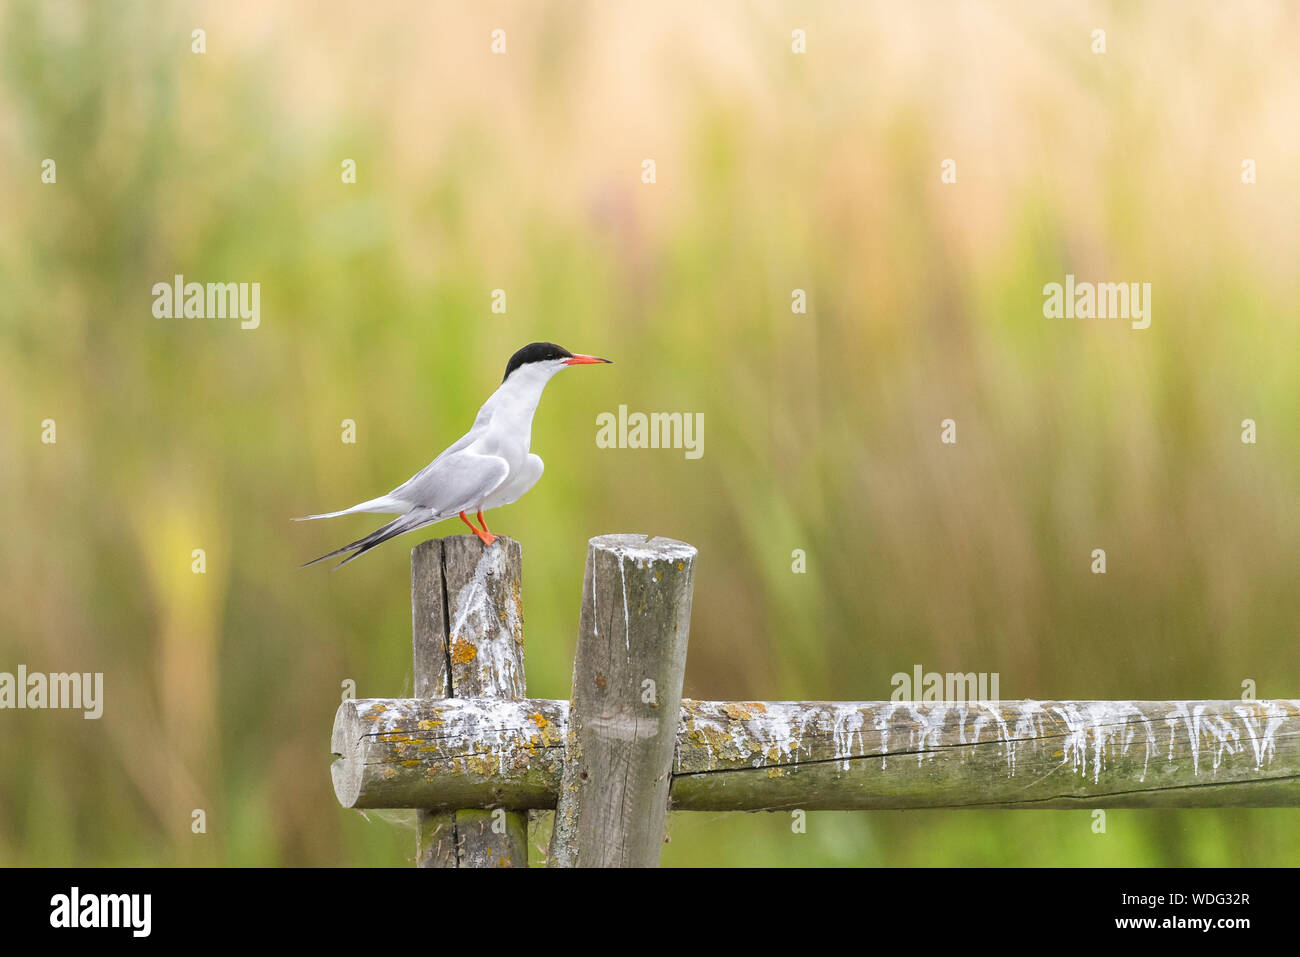 Common Terns, Sterna hirundo, at Greenwich Ecology park. Side view, perched on wooden pole. Stock Photo